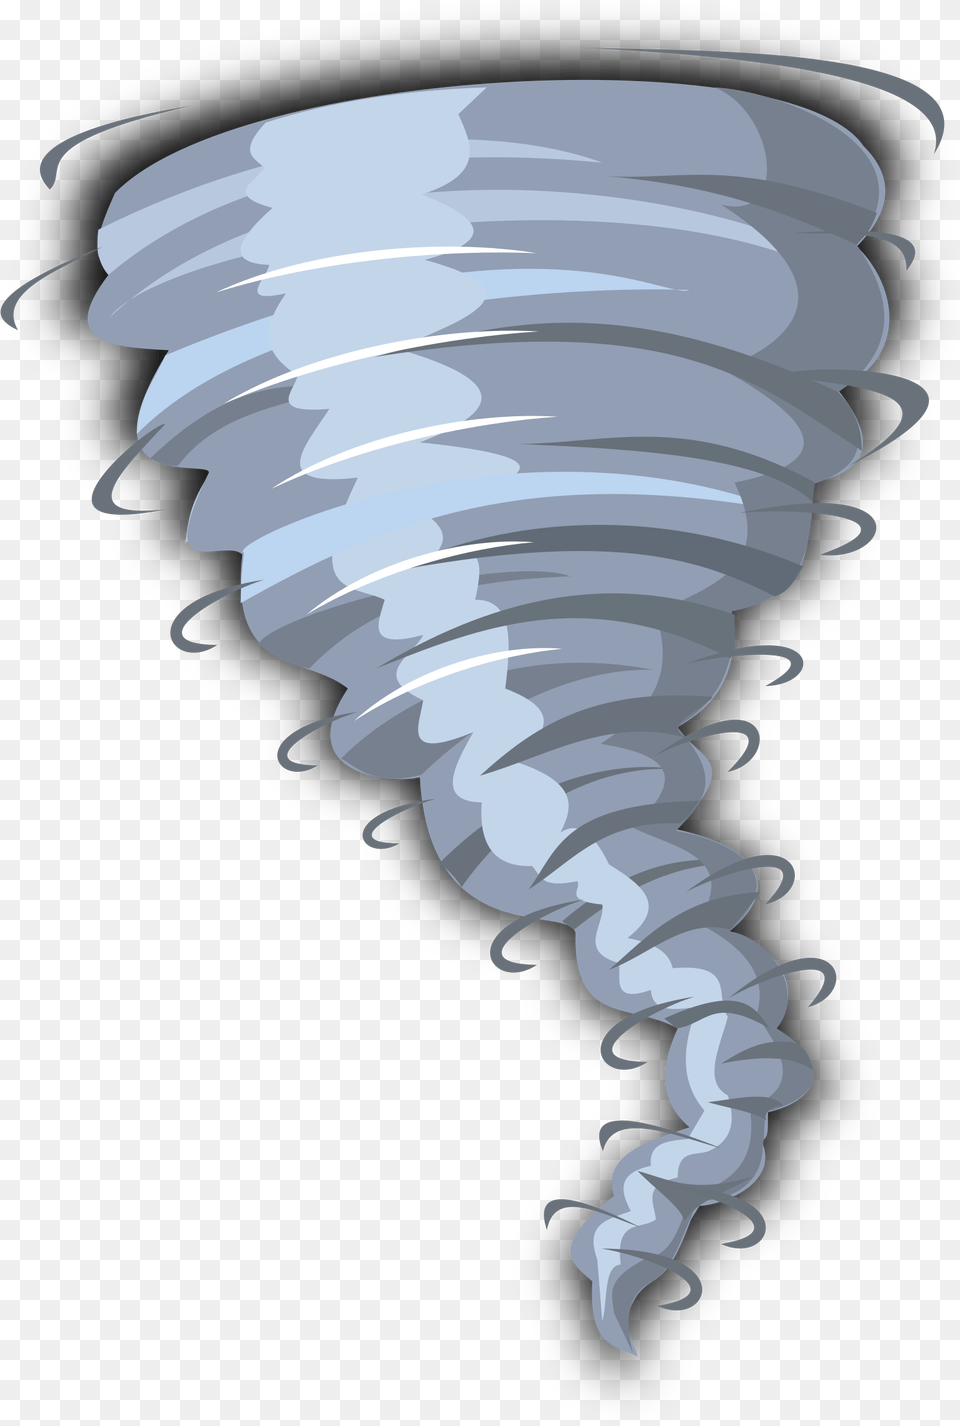 Download Hurricane Image For Tornado Free Png